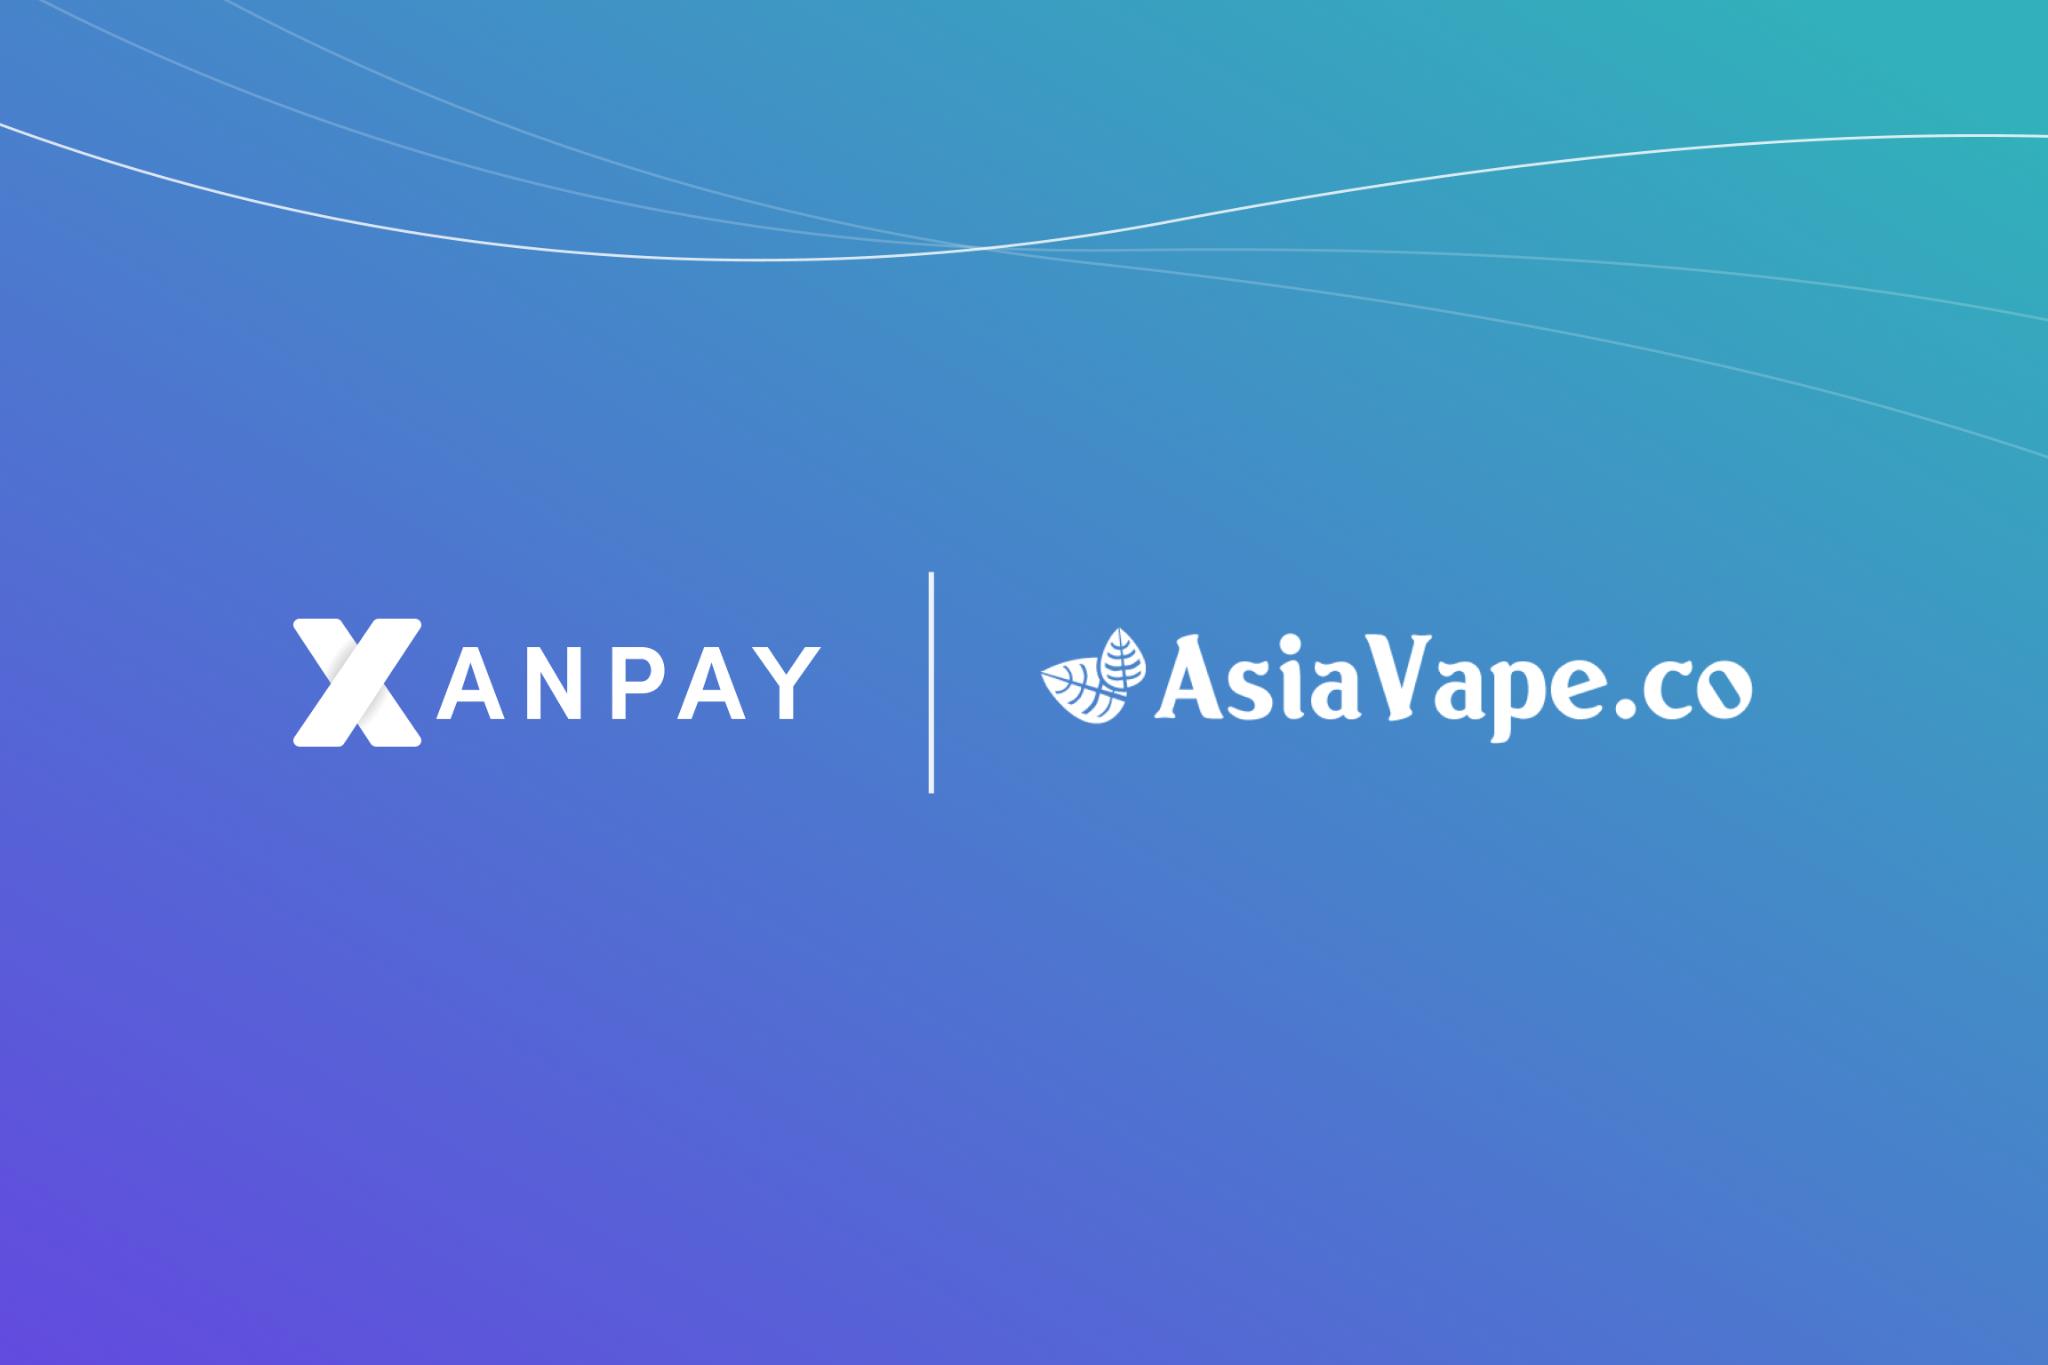 XanPay Payment Gateway Accelerates AsiaVape's Local Payments Strategy into Asian Markets 1